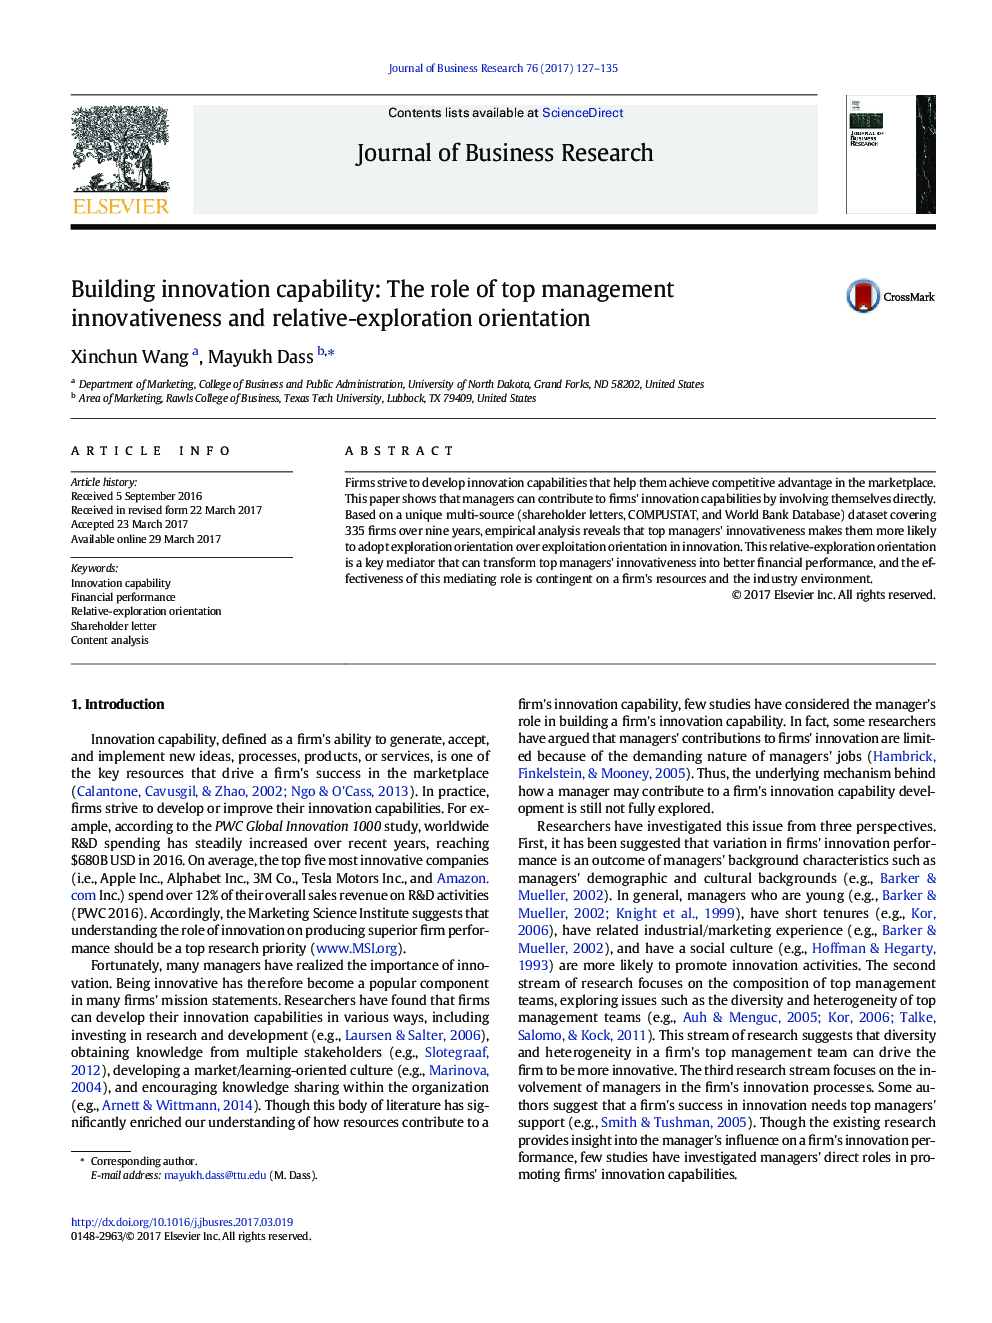 Building innovation capability: The role of top management innovativeness and relative-exploration orientation